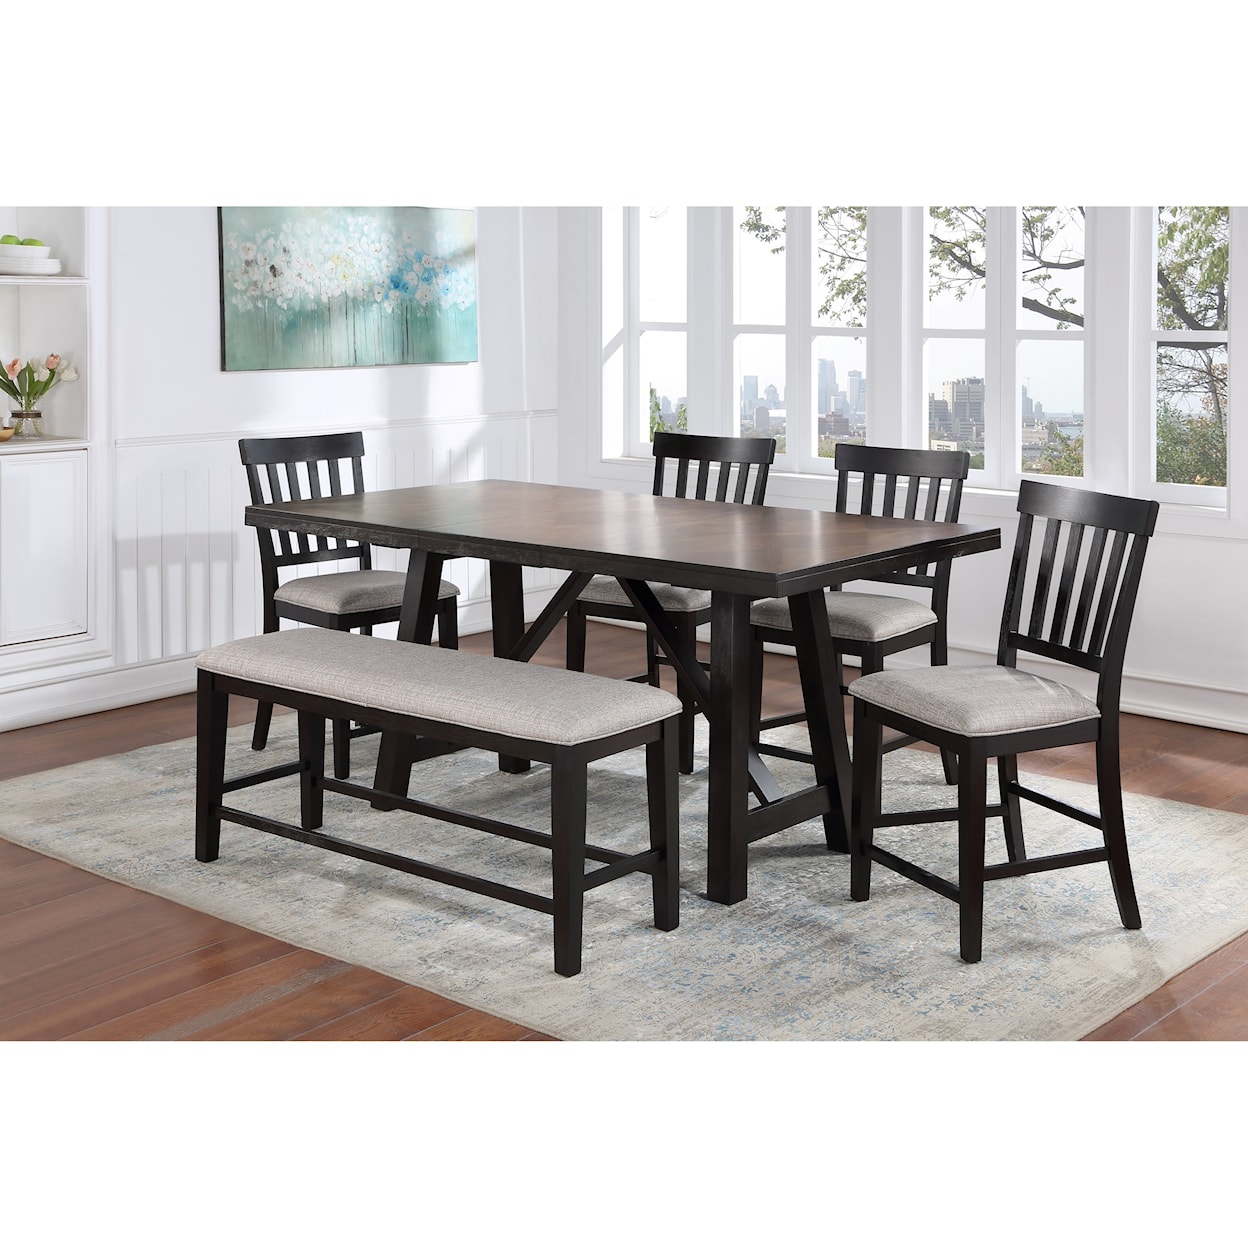 Steve Silver Halle Table & Chair Set with Bench